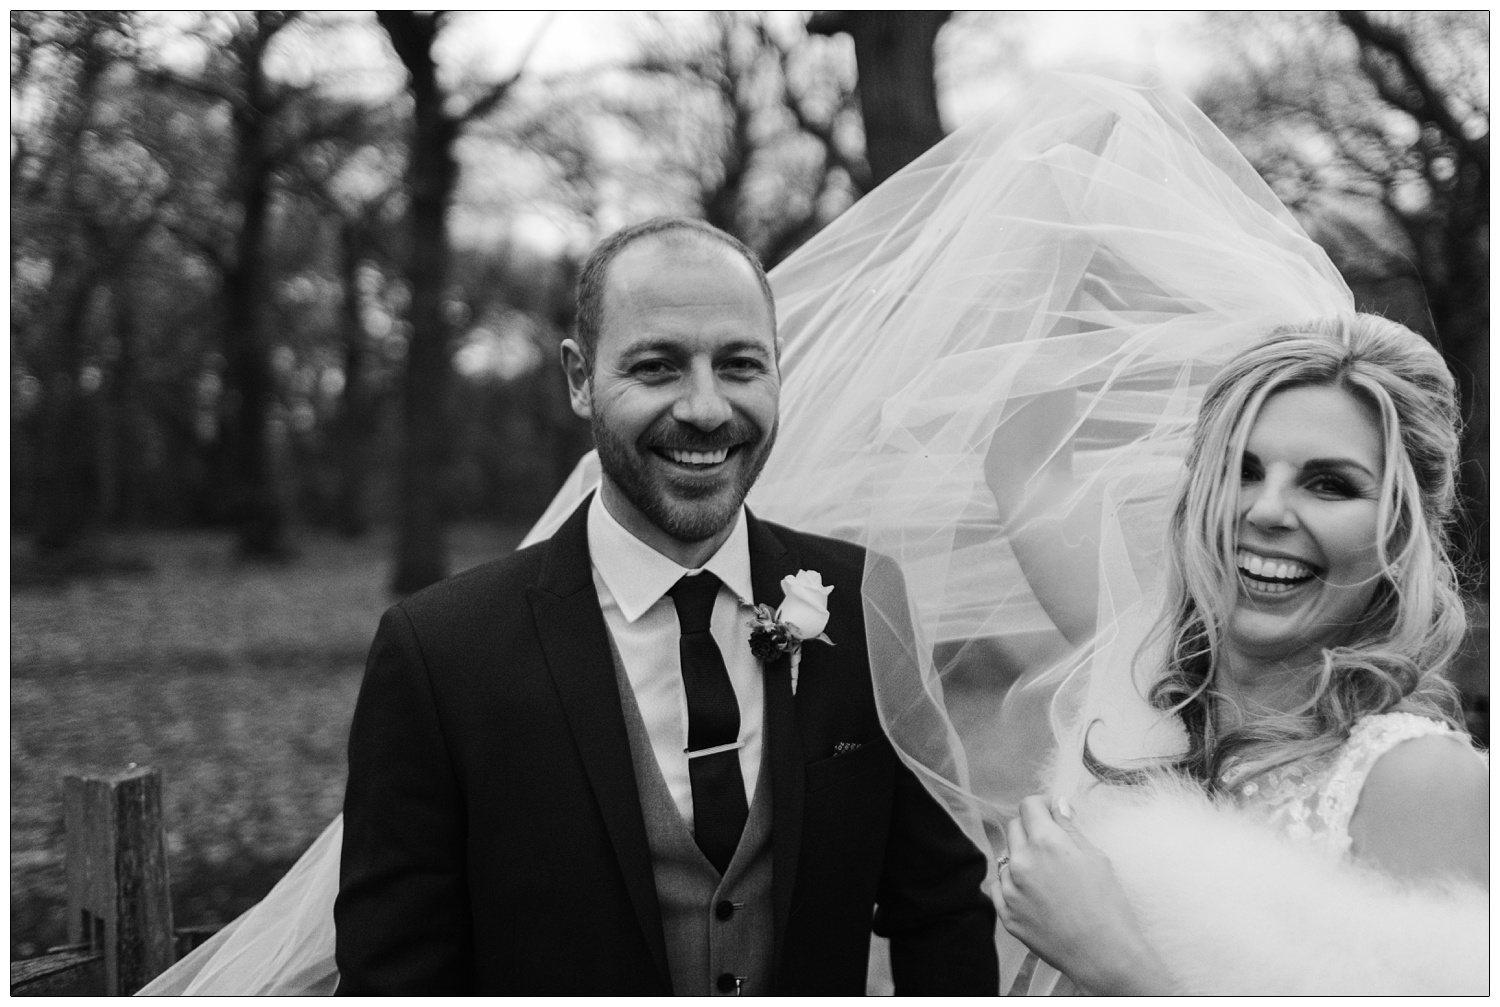 Bride and groom in a black and white photograph in Hockley woods in December. The wind is blowing the brides veil.